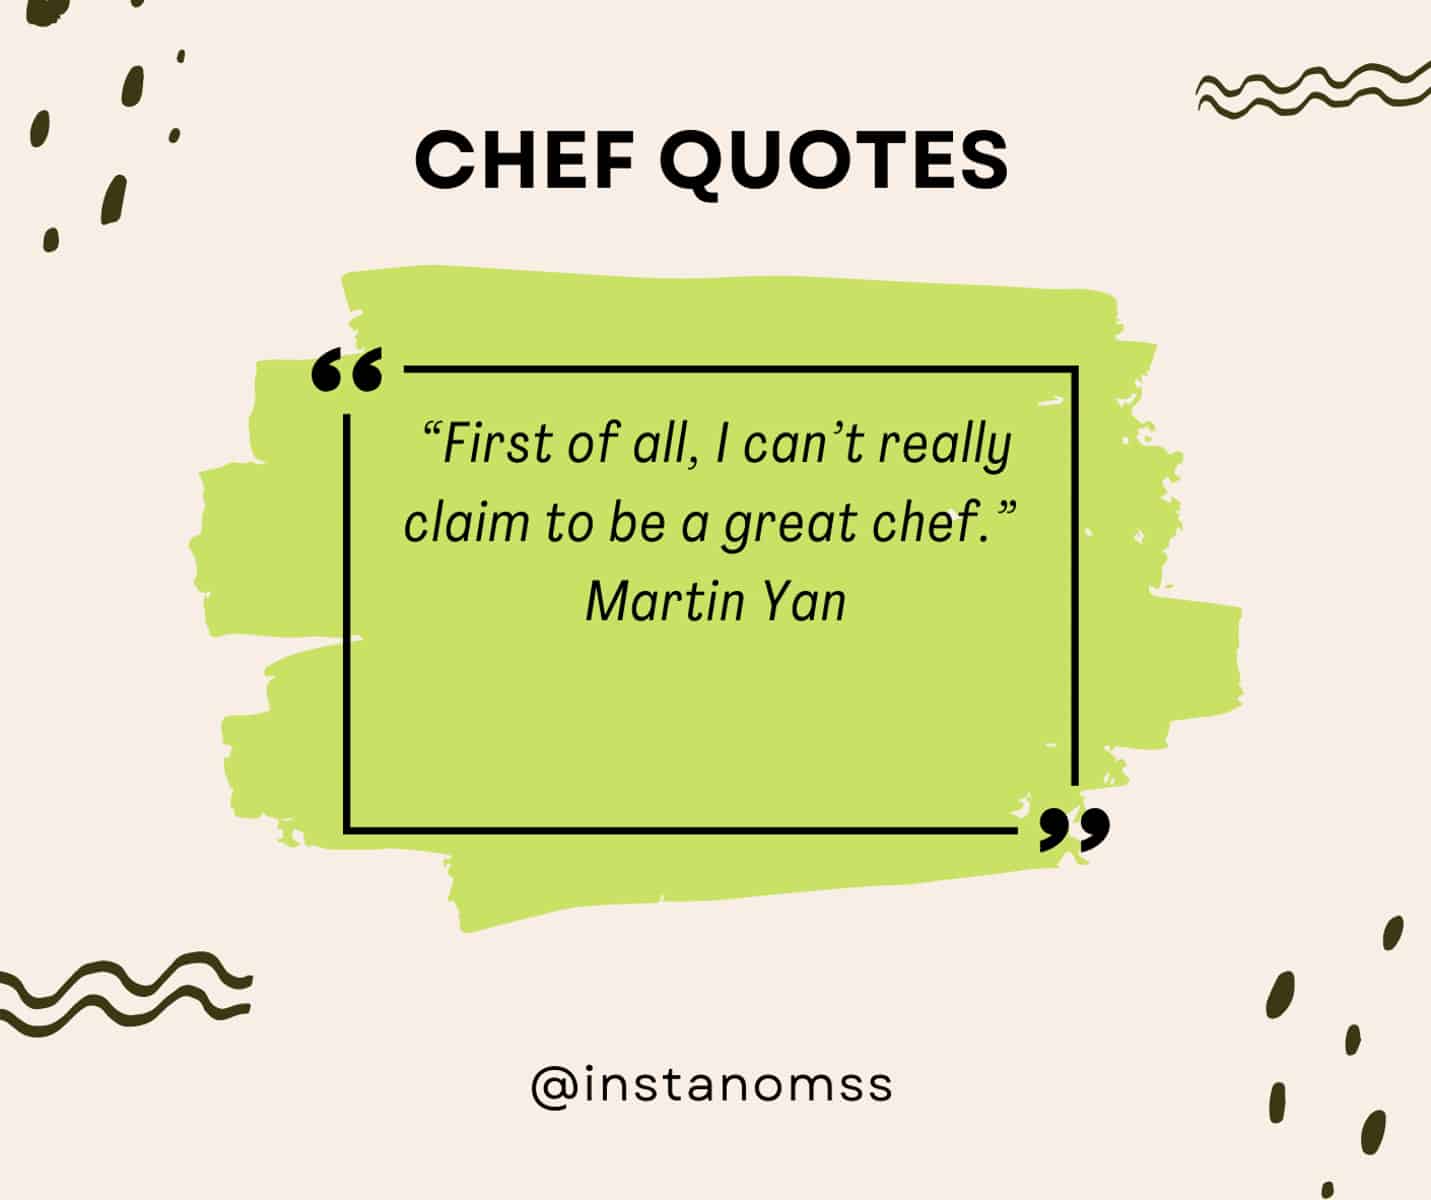 “First of all, I can’t really claim to be a great chef.” Martin Yan